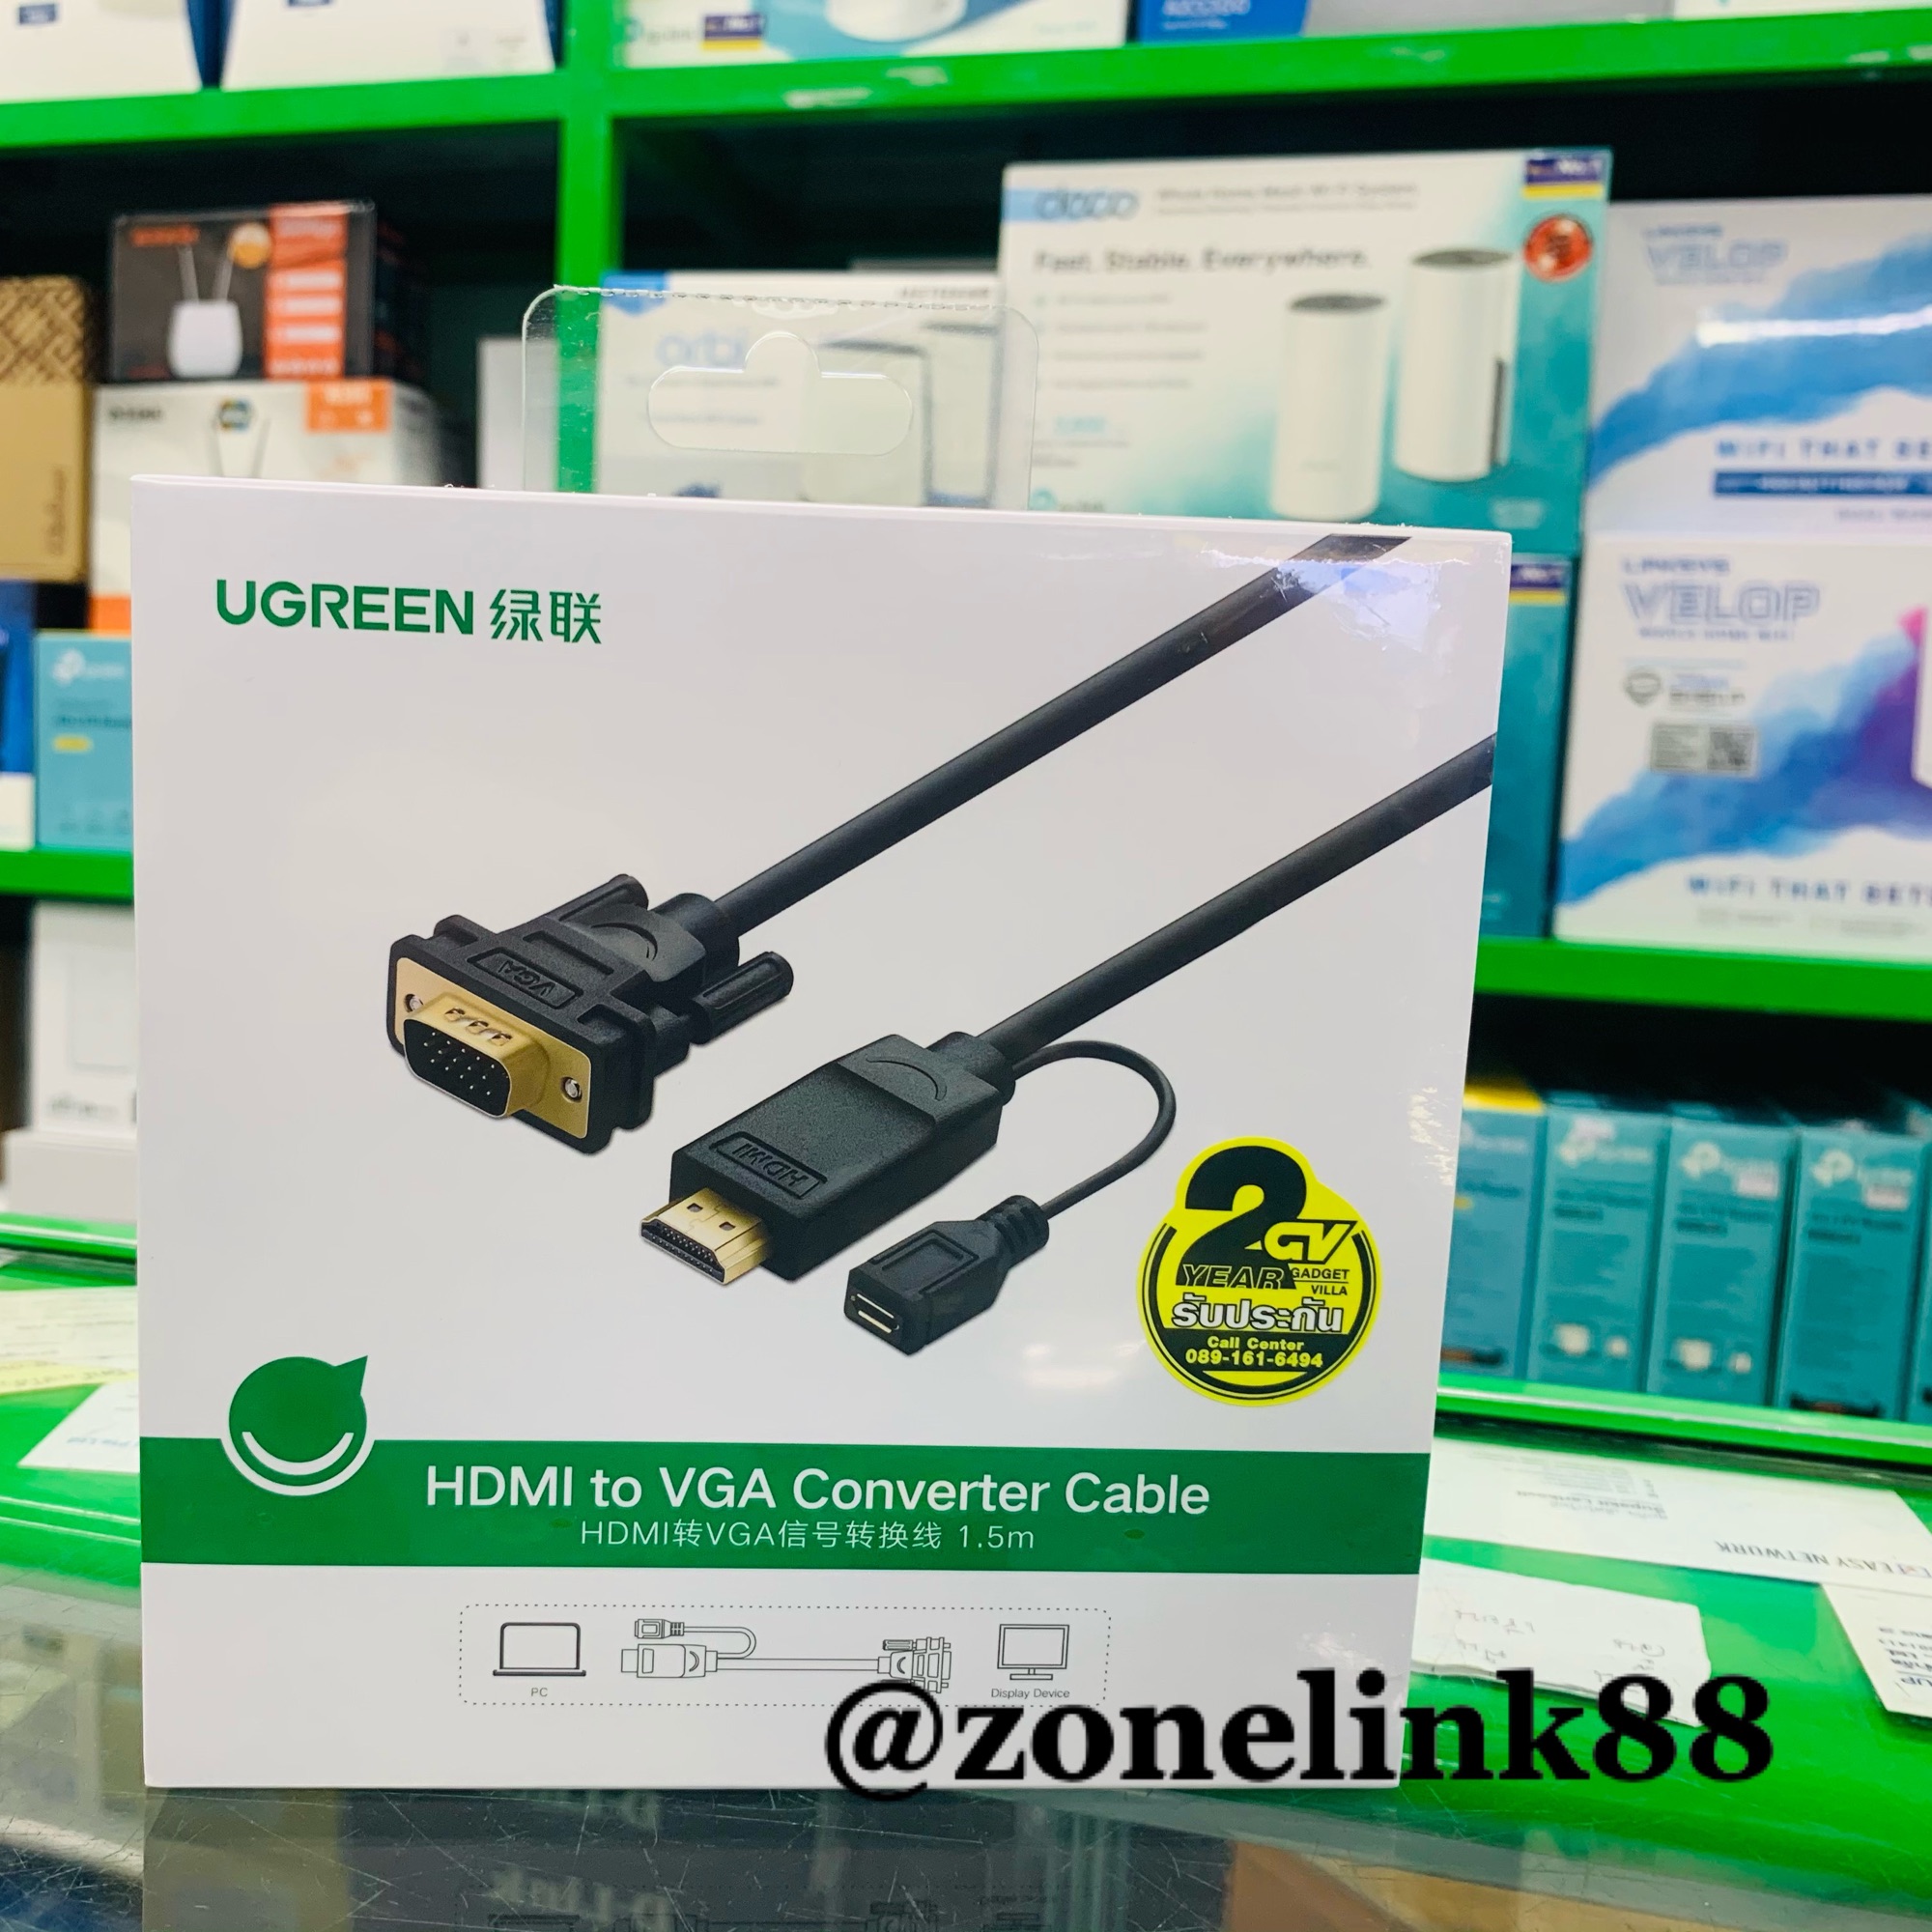 UGREEN 30449 HDMI to VGA Cable 1.5 Meters